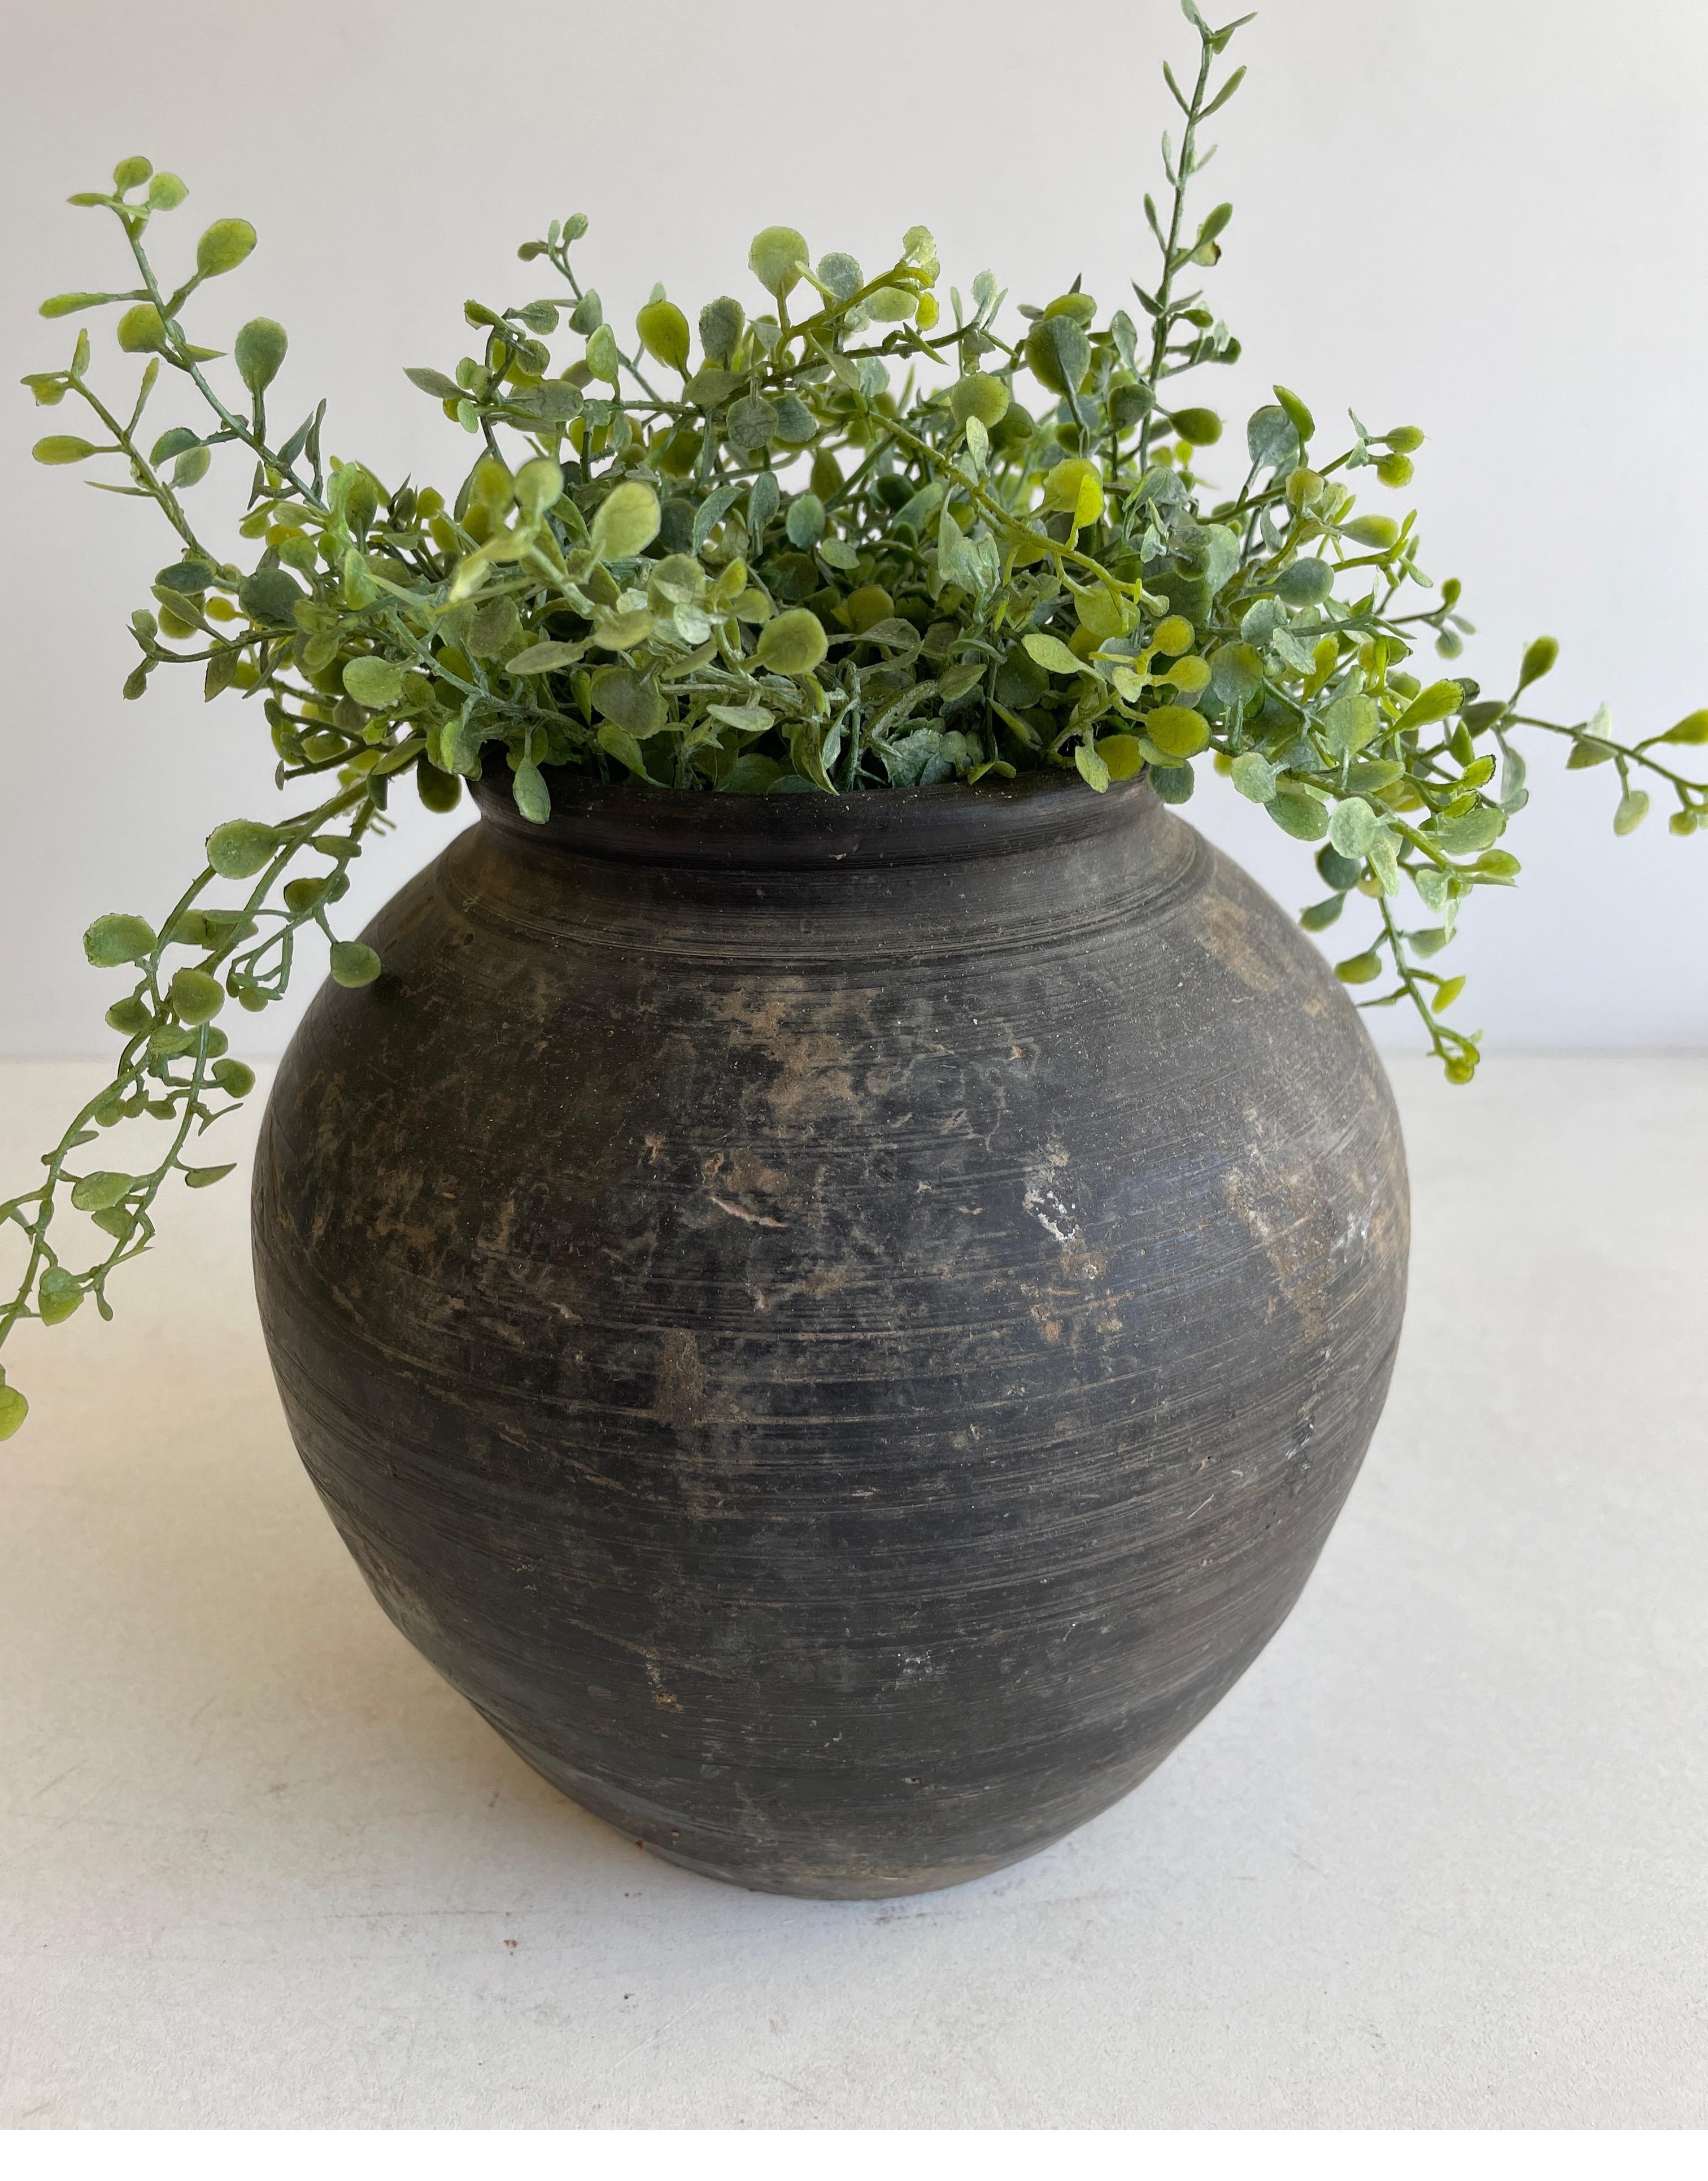 Vintage Matte Clay Oil Pottery Decorative Pot
Vintage Matte Oil Pots Pottery beautifully terracotta rich in character, this vintage oil pot adds just the right amount of texture + warmth where you need it. Stunning matte finish with warm